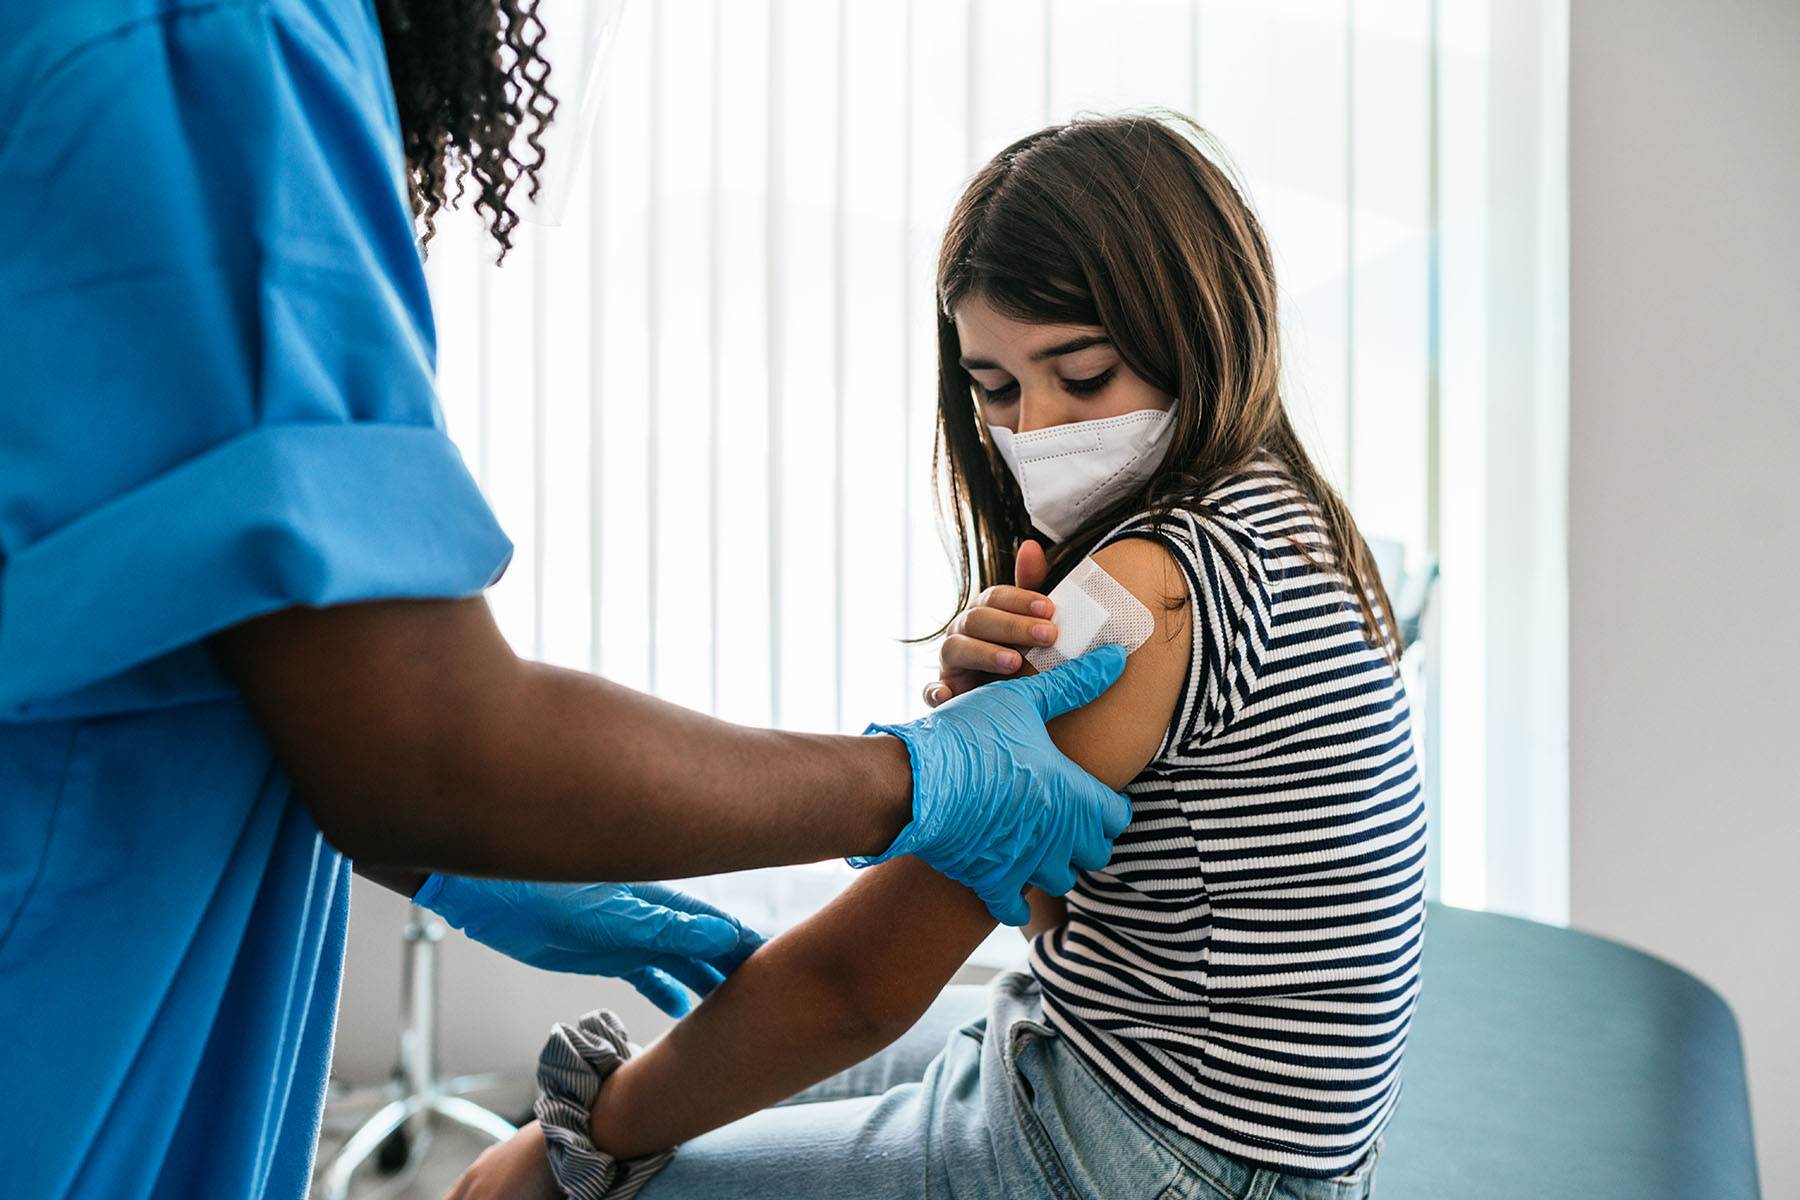 Medical health professional putting a bandage on a girls arm, after she received a vaccination. The girl is wearing a face mask.